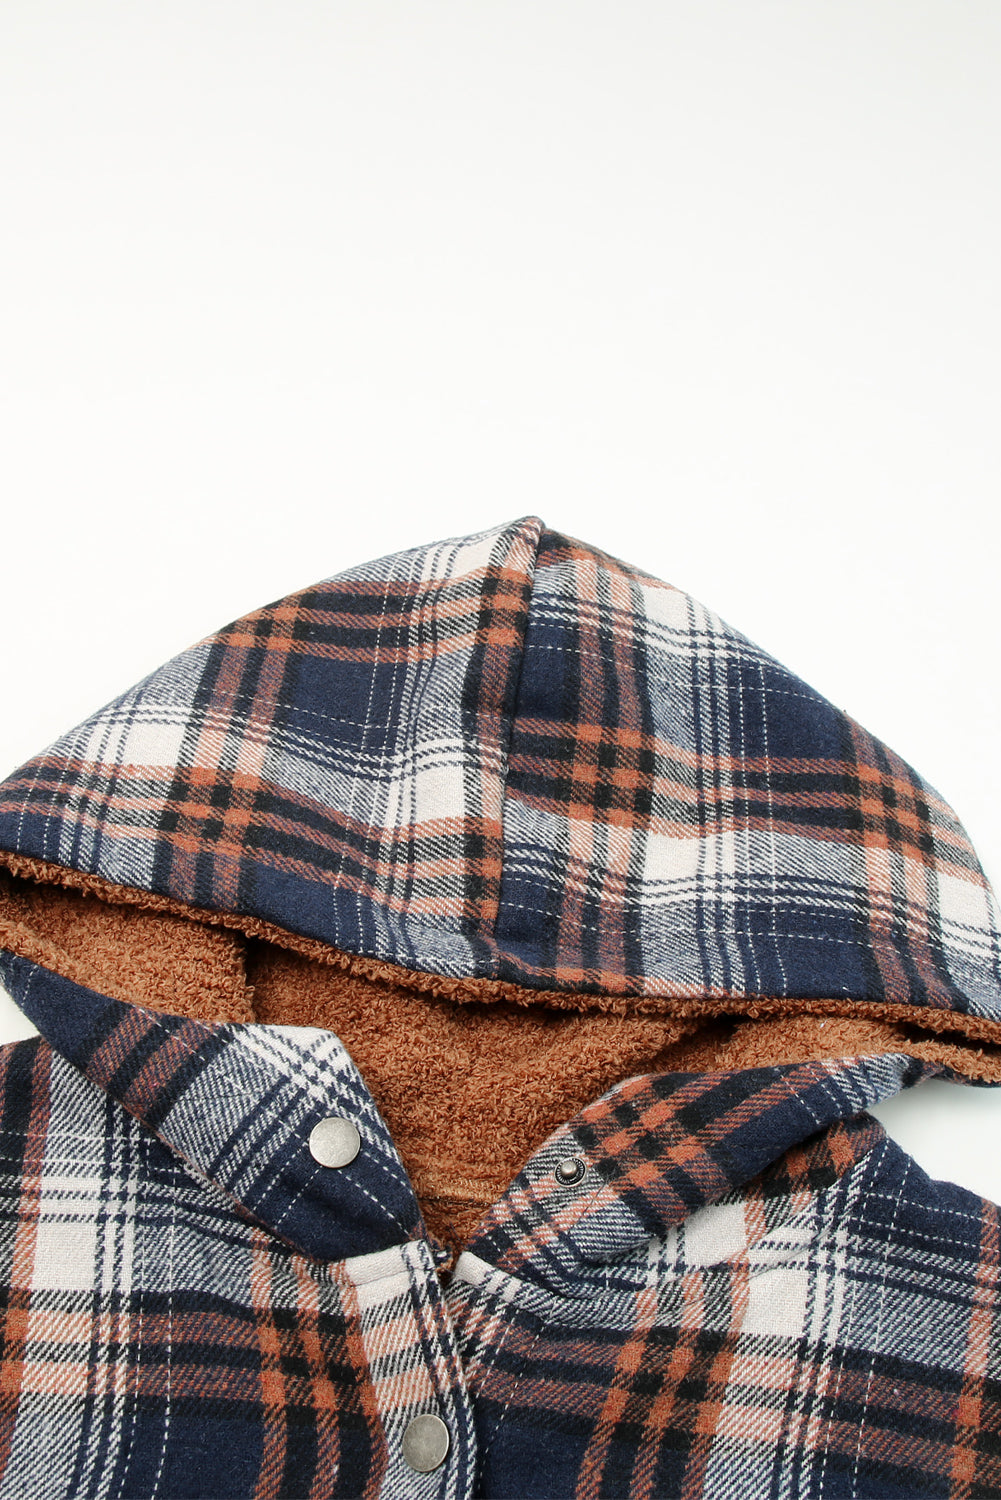 Gray Snap Button Sherpa Lined Hooded Flannel Jacket